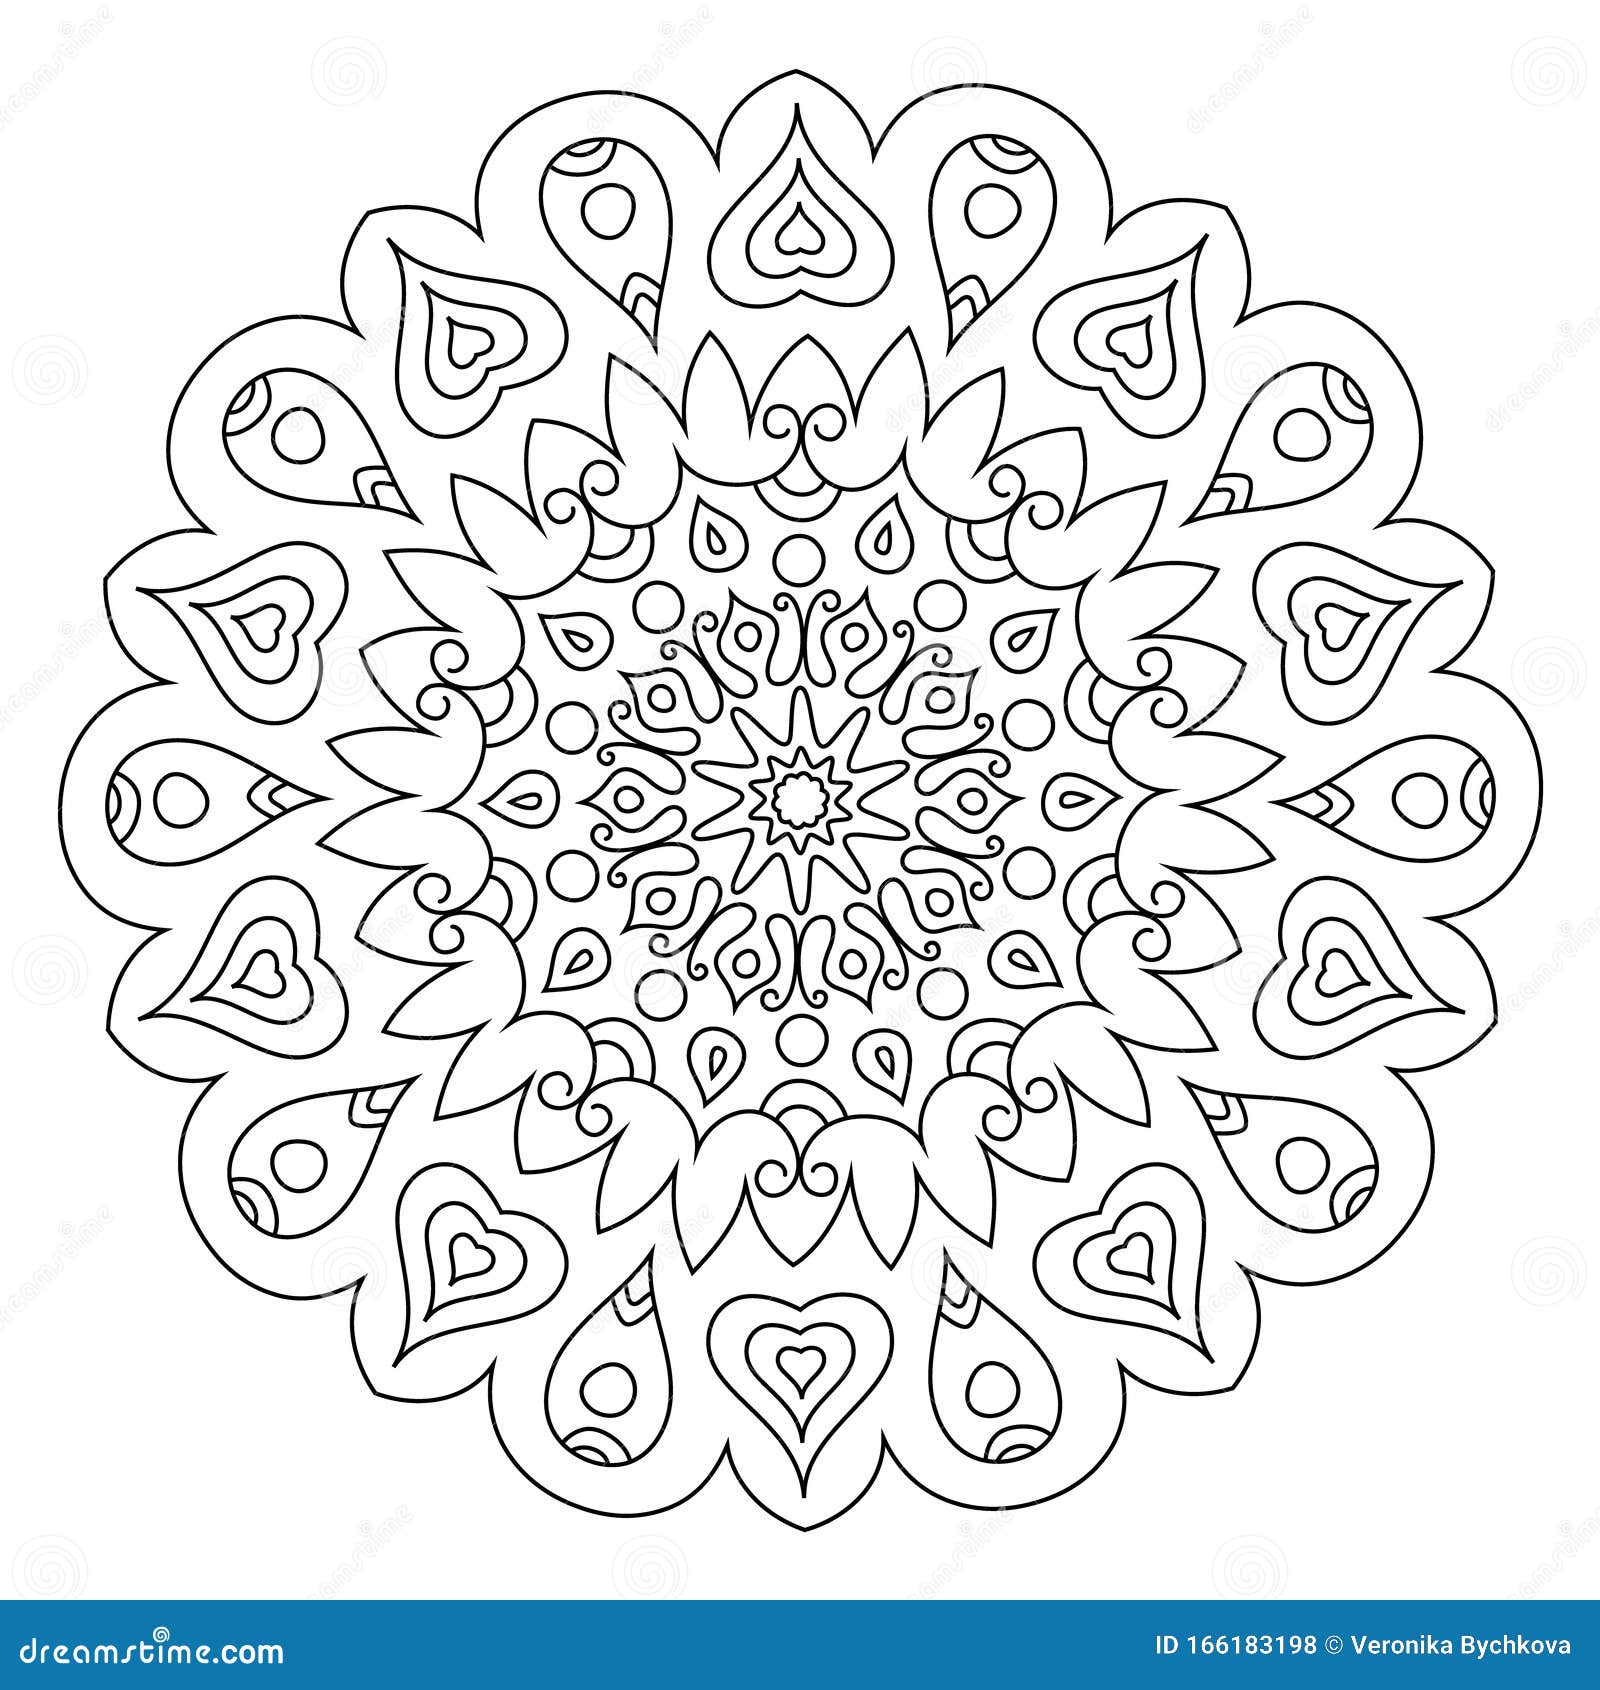 Radial zentangle mandala adult coloring book page zendoodle circular black and white outline illustration stock illustration